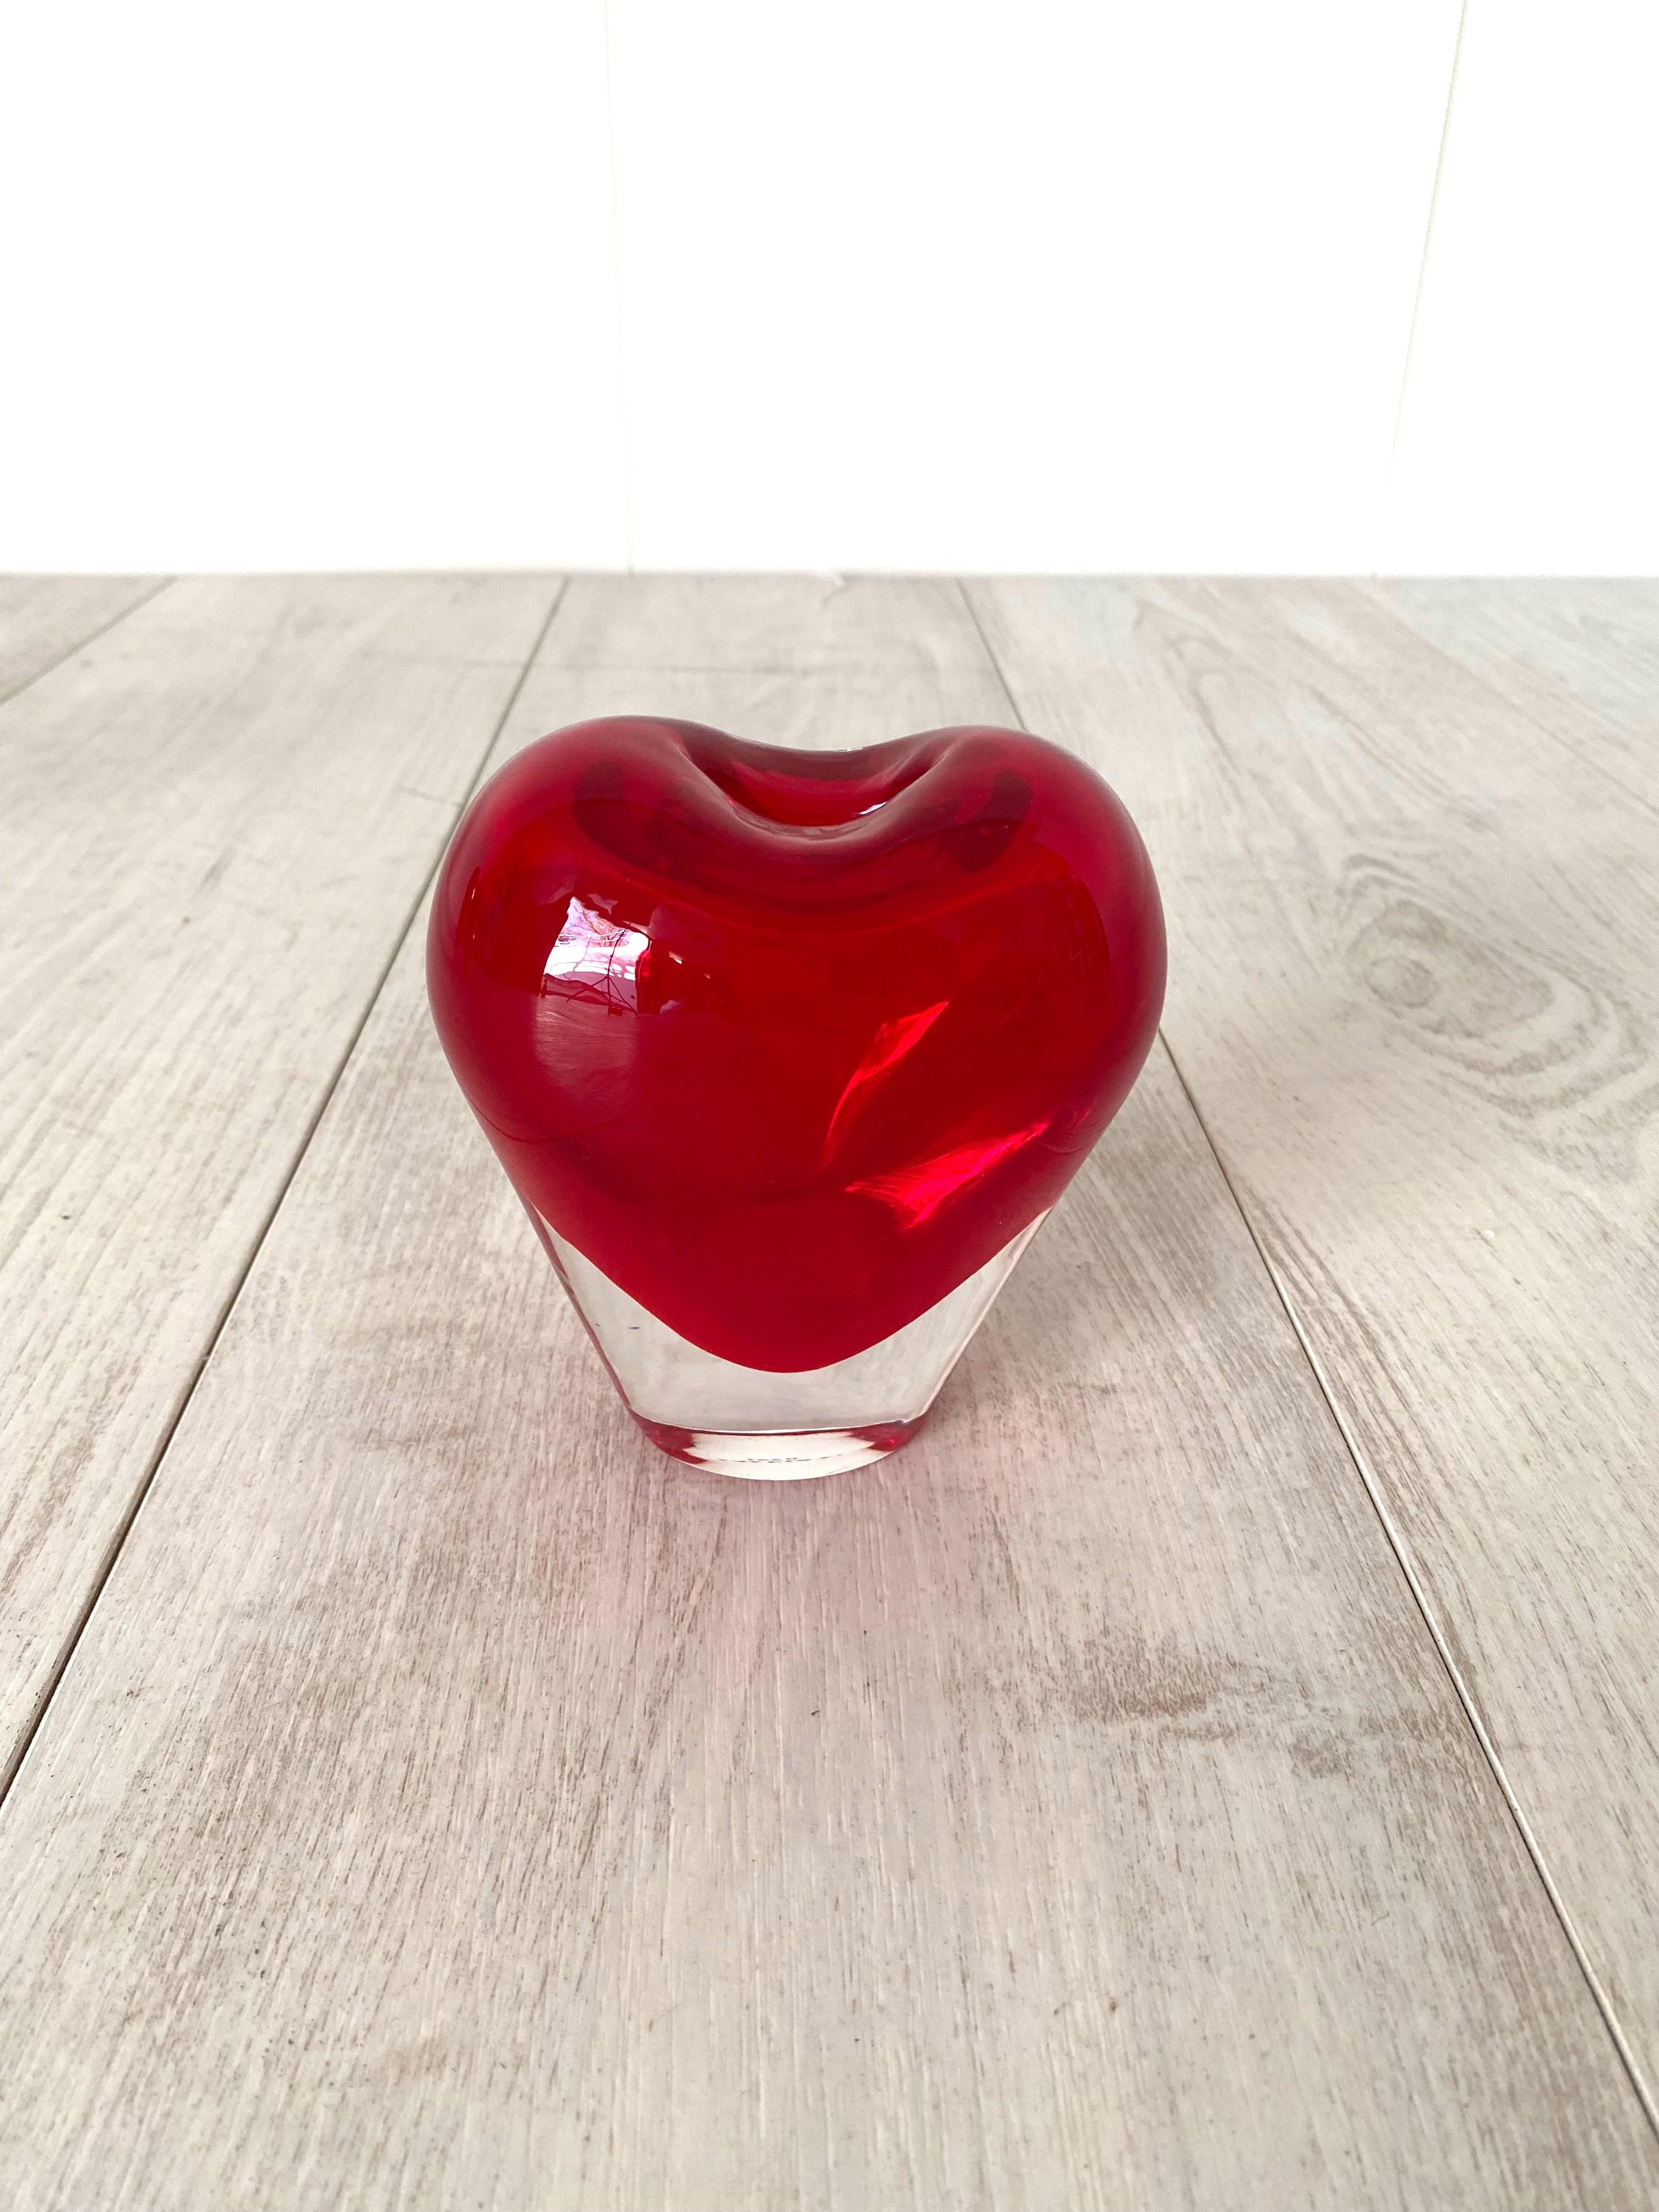 Art Glass Cuore & Cuoricino Heart Vases by Maria Christina Hamel for Salviati, 1990s For Sale